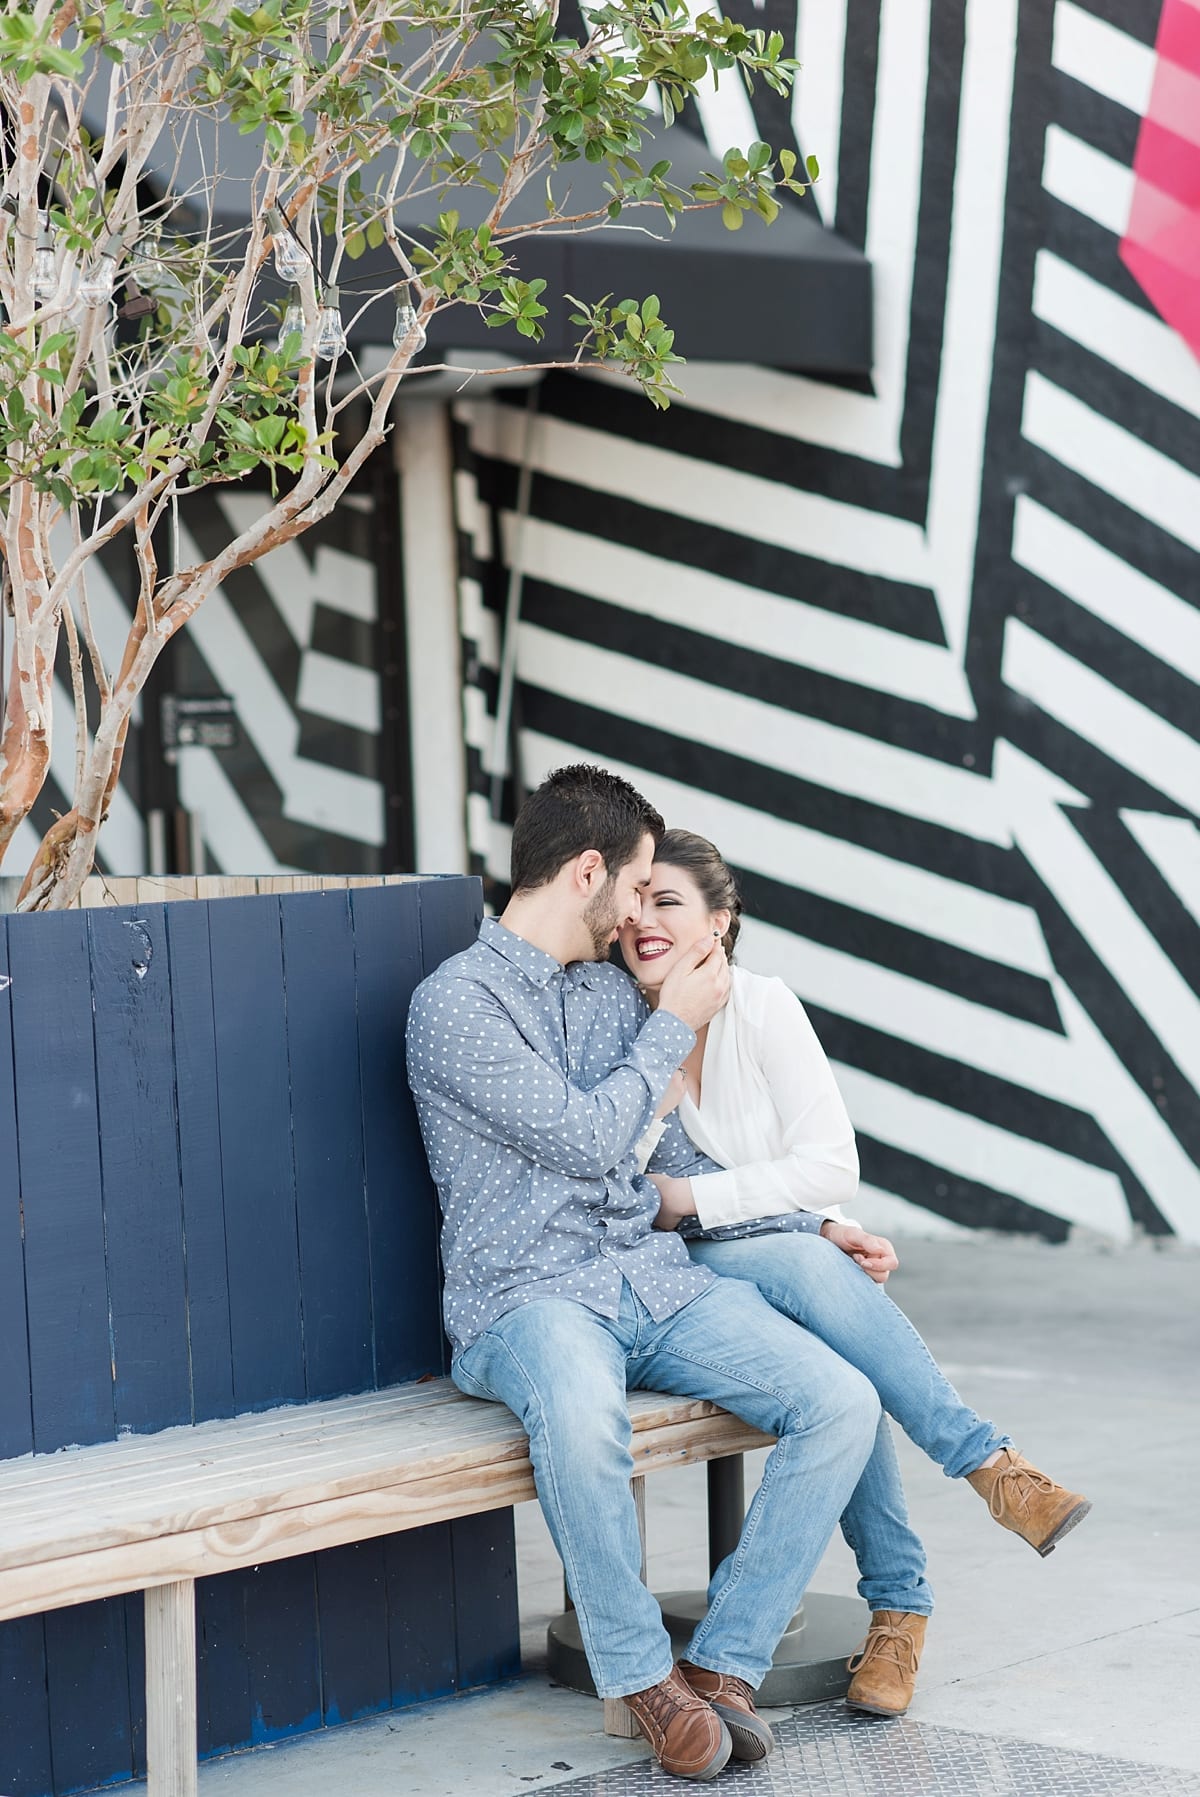 Wynwood-Walls-Engagement-Pictures_0441